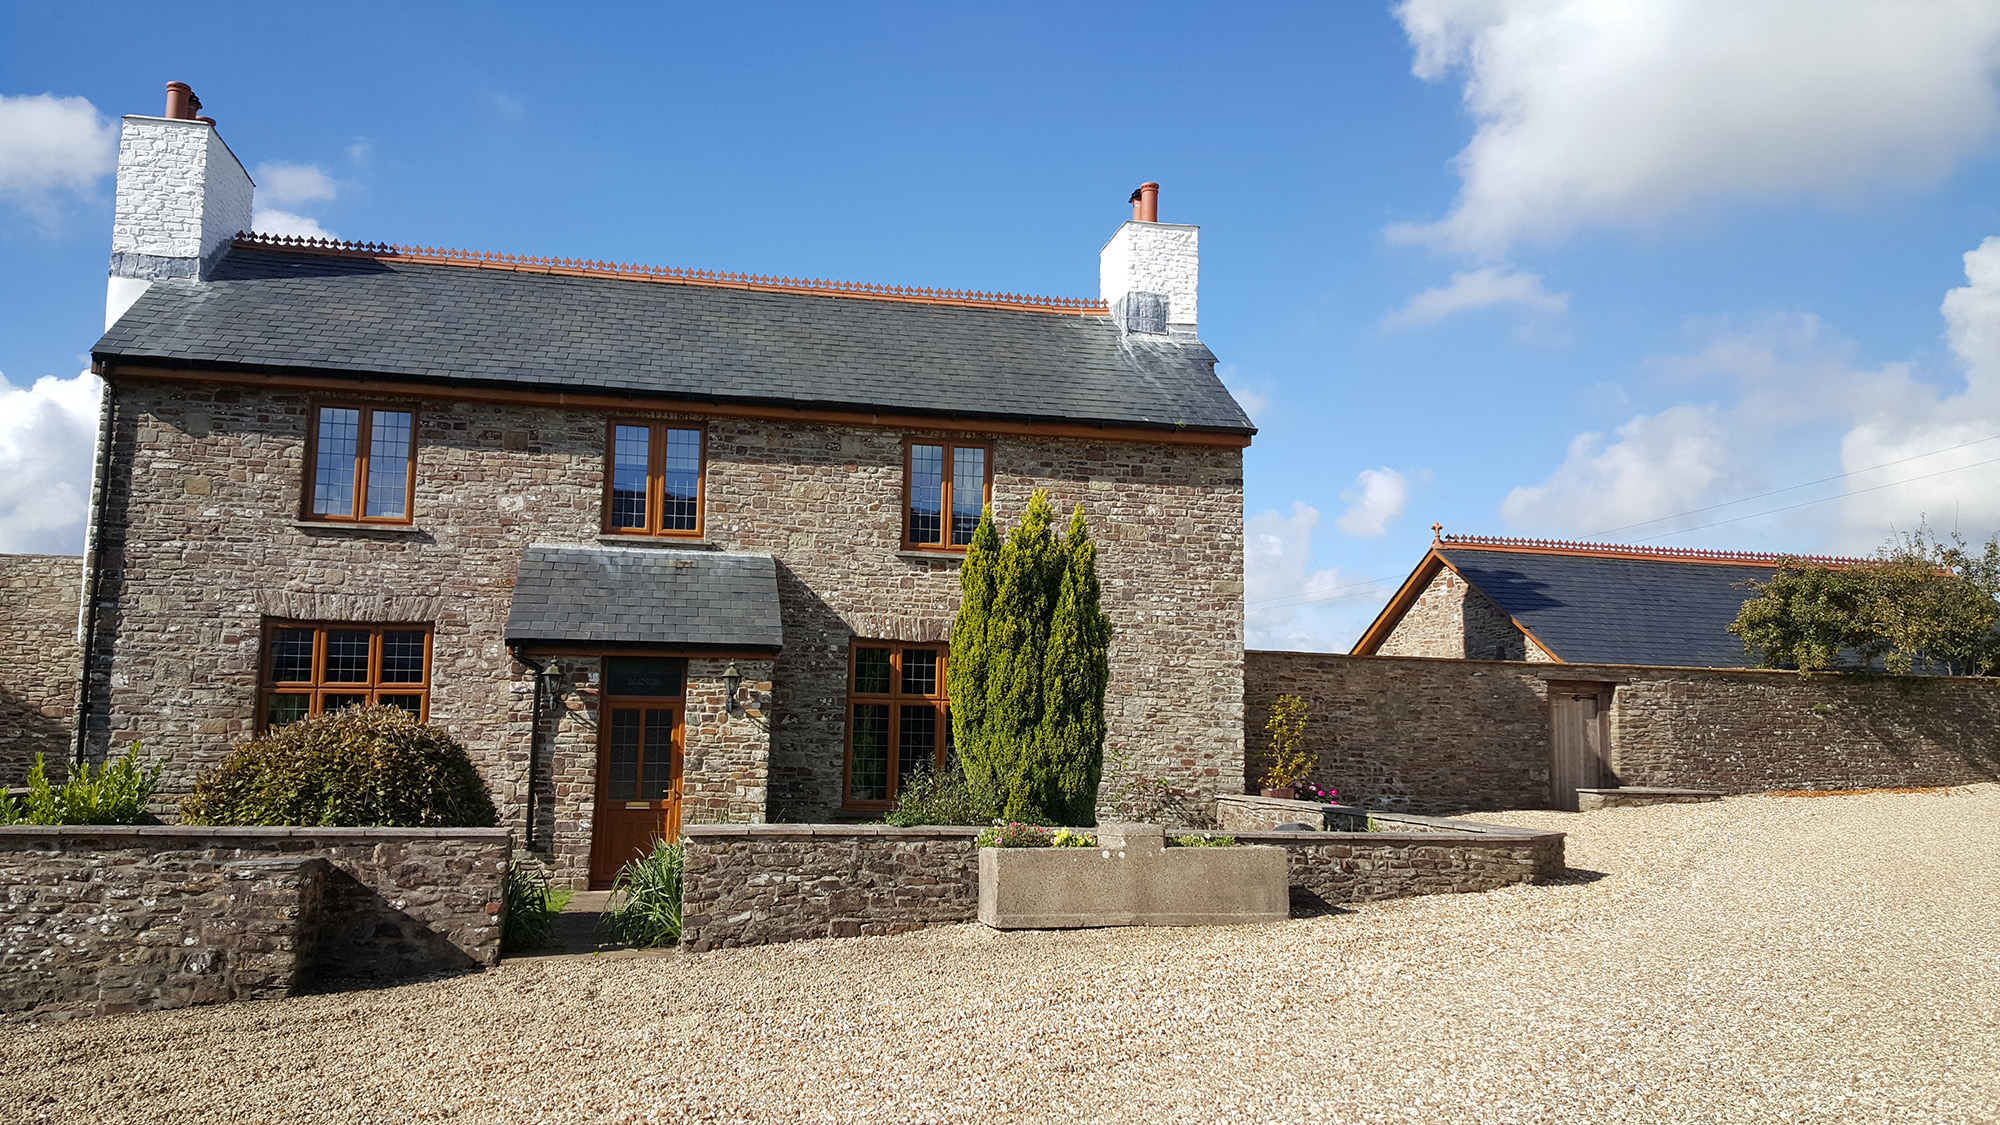 5 bed country house to rent in High Bickington, Devon 0